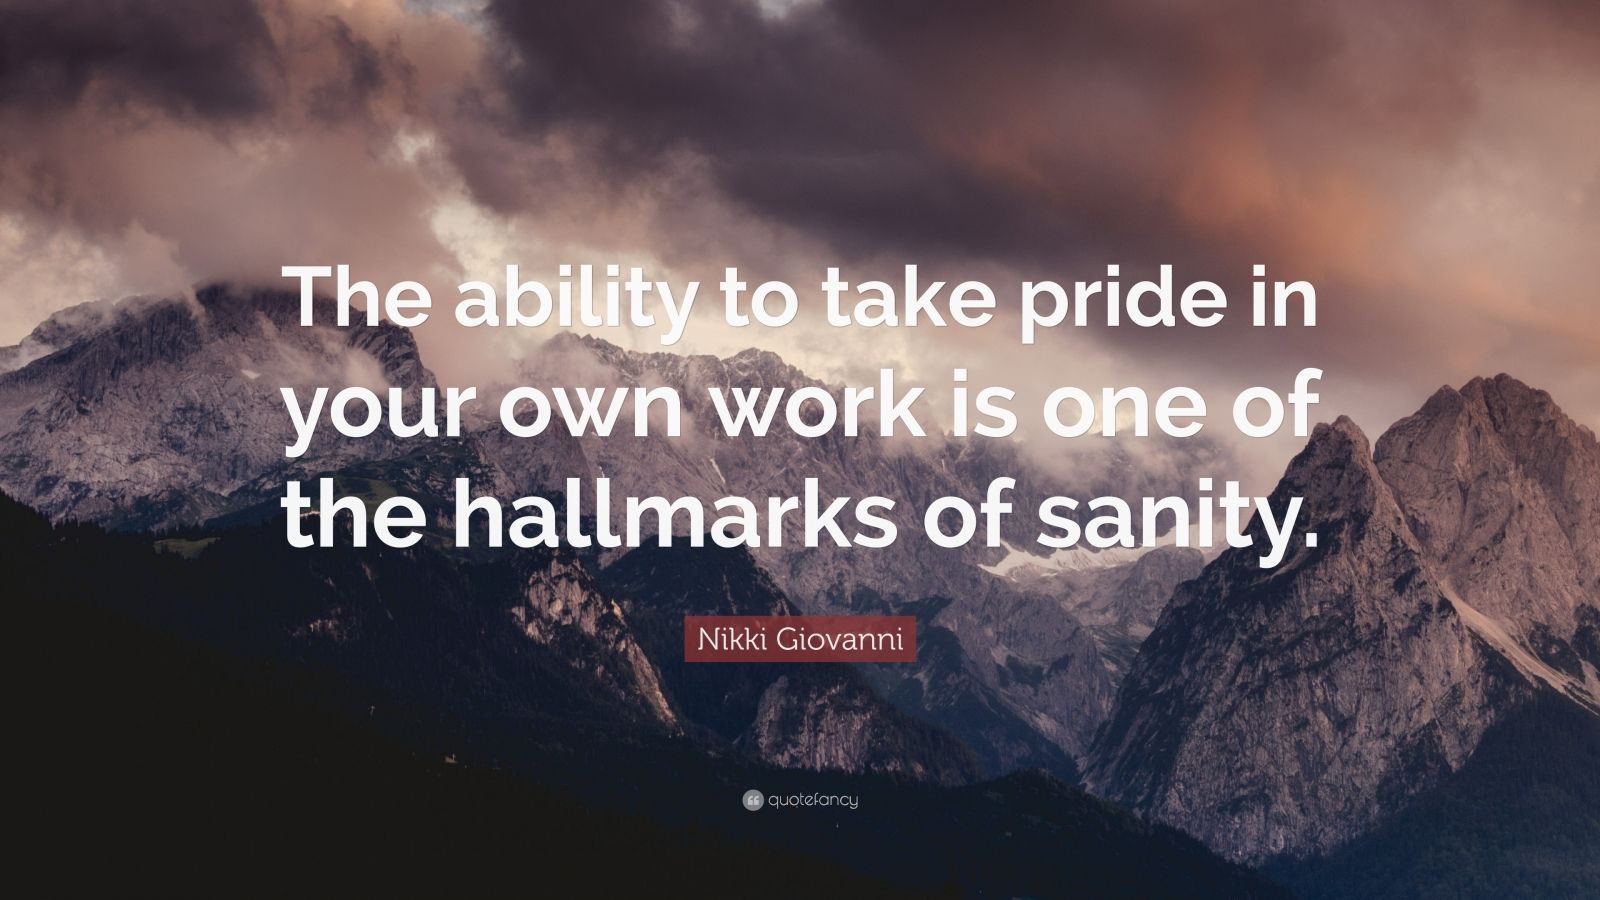 2318170 Nikki Giovanni Quote The ability to take pride in your own work is